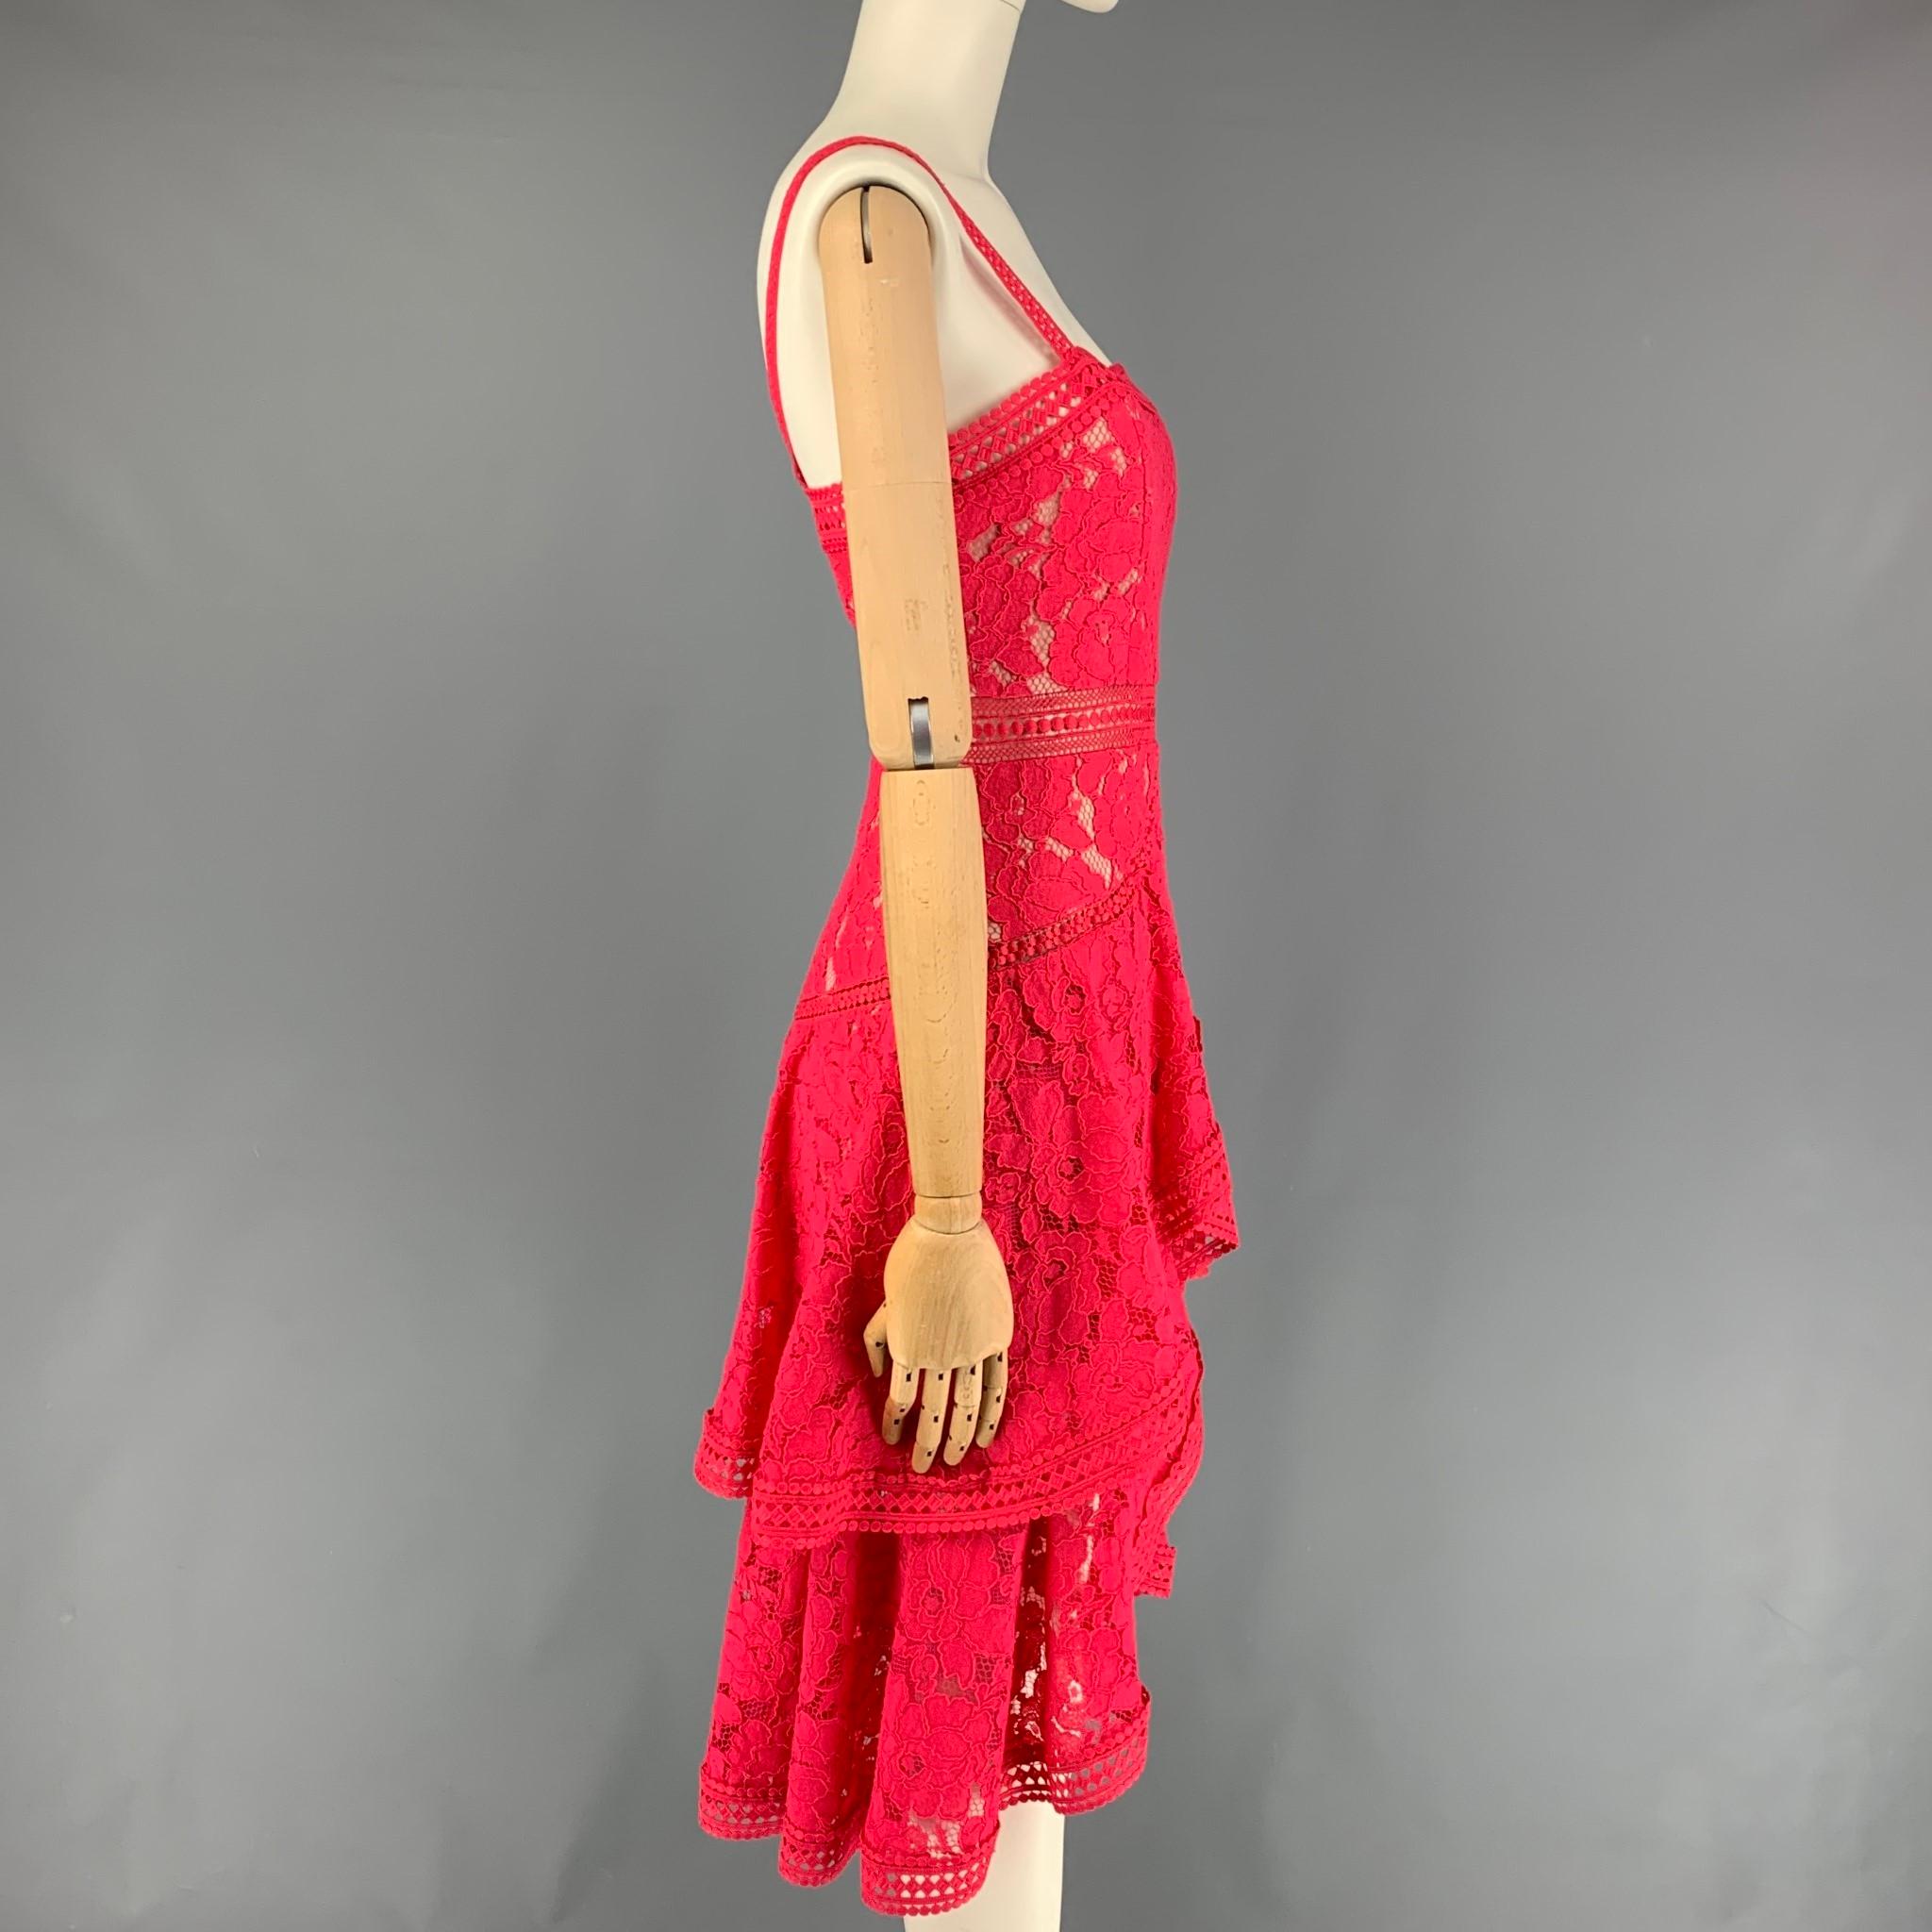 ALICE + OLIVIA dress comes in a raspberry eyelet cotton / nylon with a slip line featuring an a-line style and a back zip up closure. 

Very Good Pre-Owned Condition. Fabric tag removed.
Marked: 0

Measurements:

Bust: 28 in.
Waist: 26 in.
Hip: 34